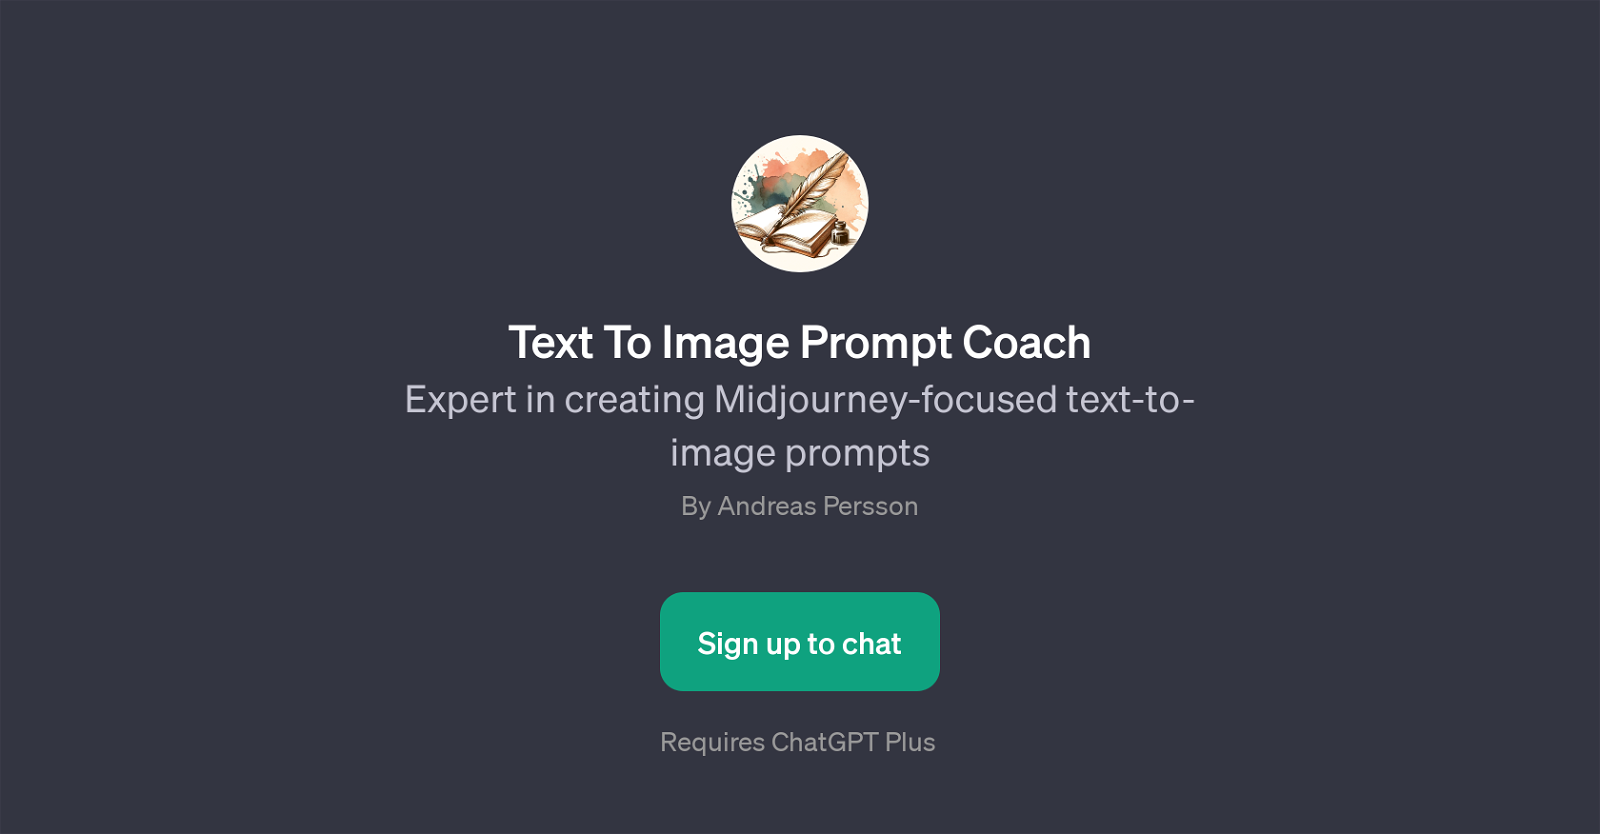 Text To Image Prompt Coach website